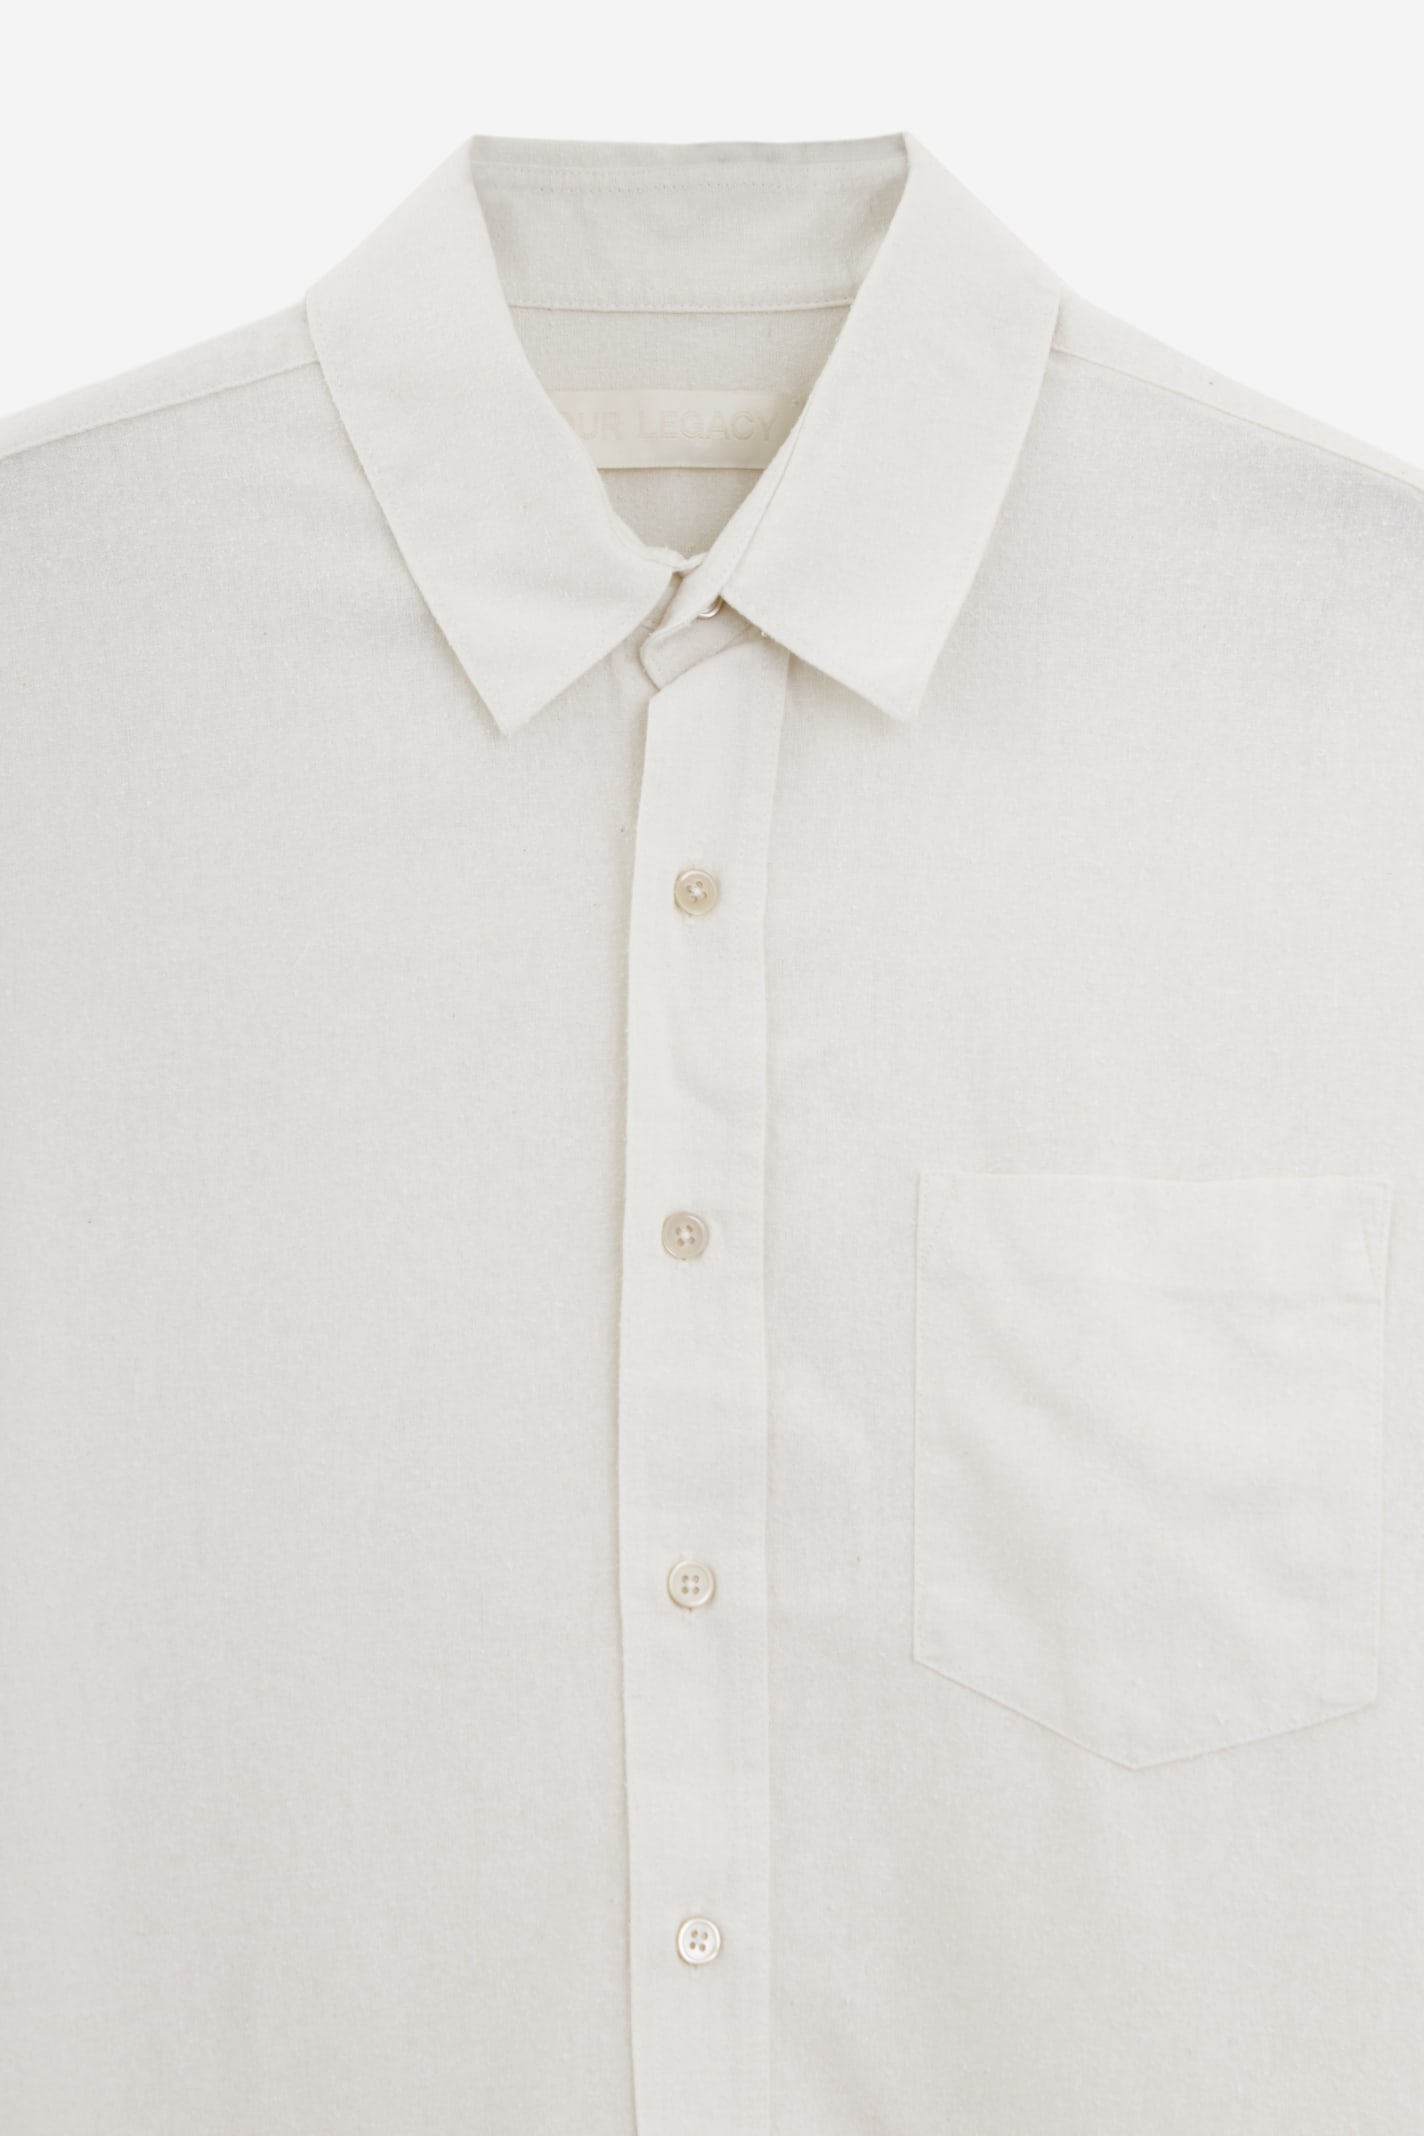 Shop Our Legacy Classic Shirt In White